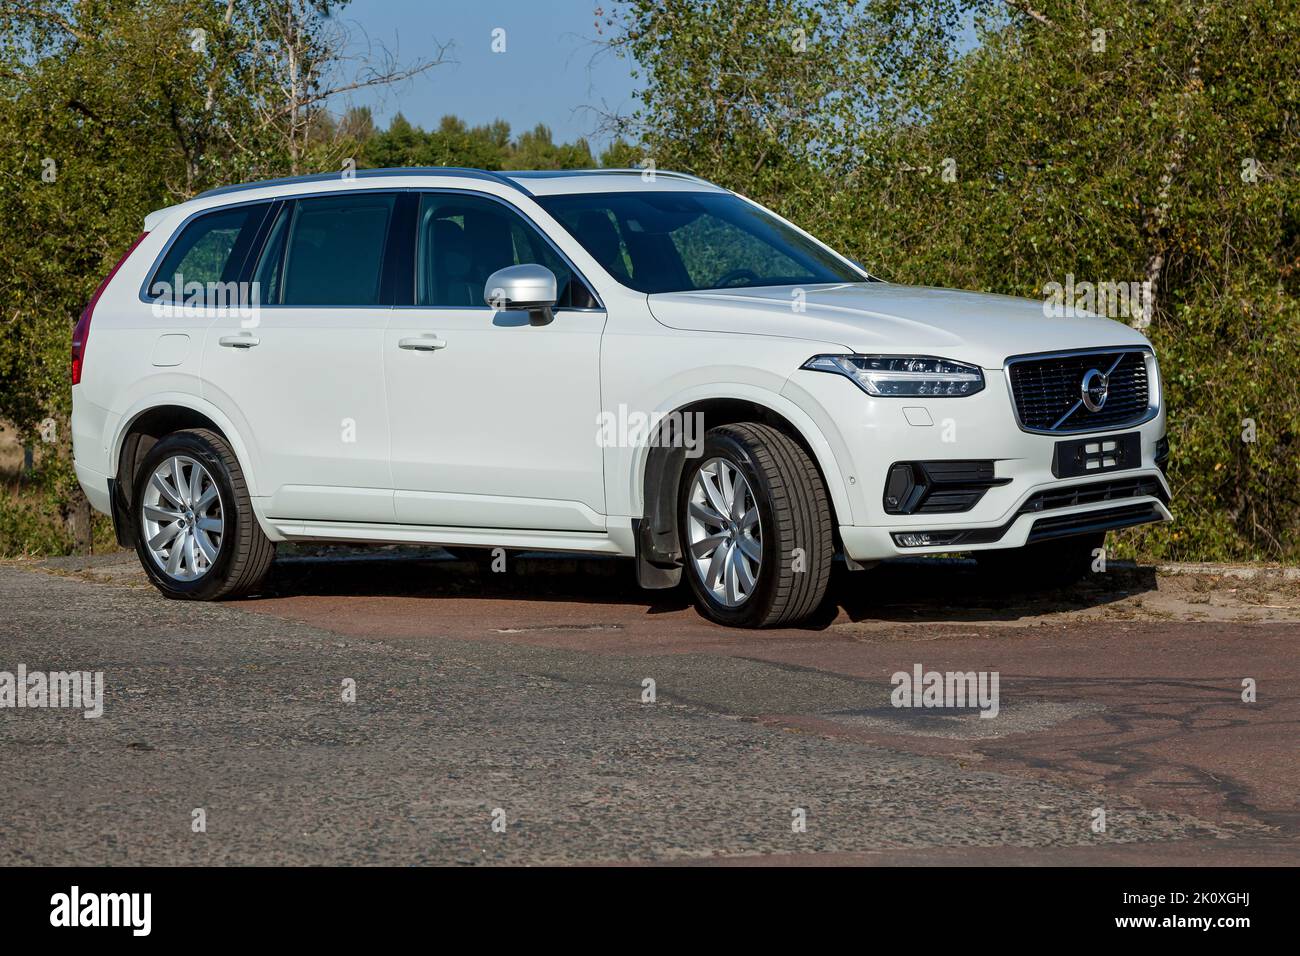 Ukraine Kiev September 26, 2020: Volvo XC90 is the first SUV by Volvo Cars. Designed with Volvo's core values of safety, environment, reliability and Stock Photo